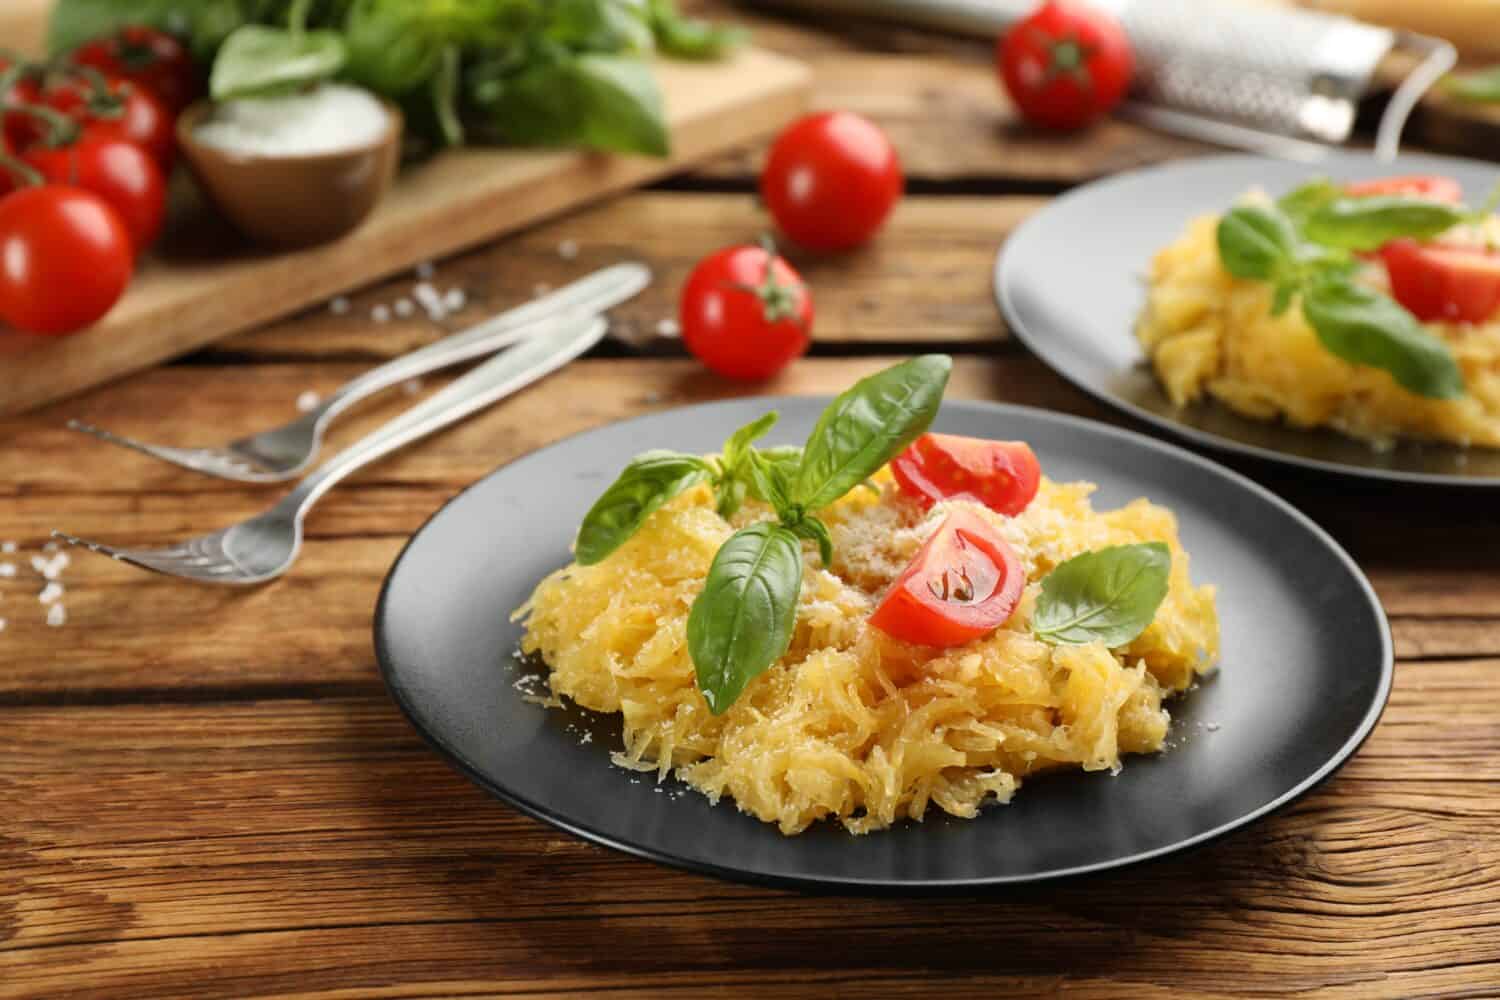 Tasty spaghetti squash with tomatoes and basil served on wooden table